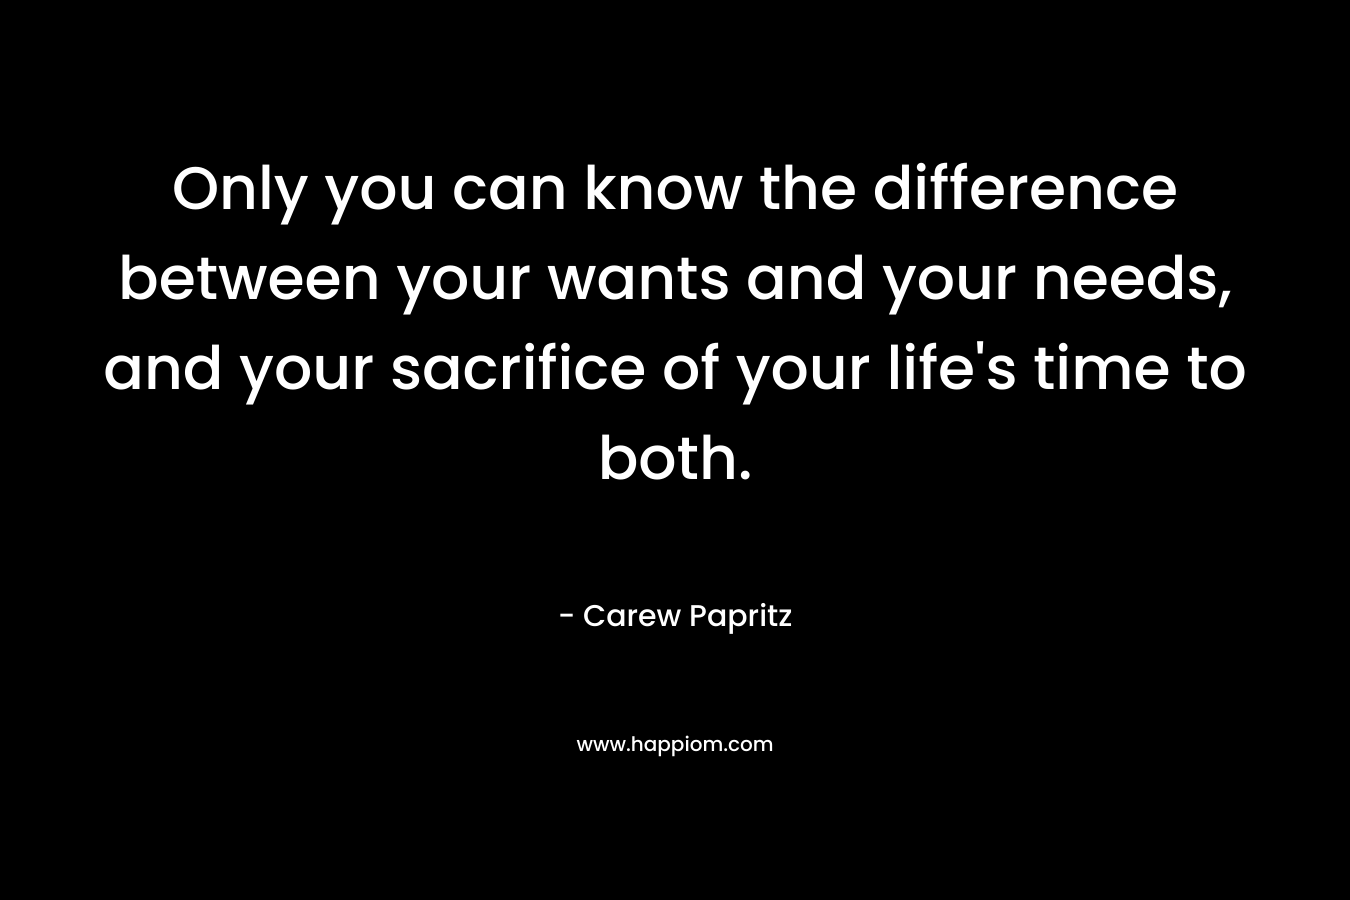 Only you can know the difference between your wants and your needs, and your sacrifice of your life's time to both.